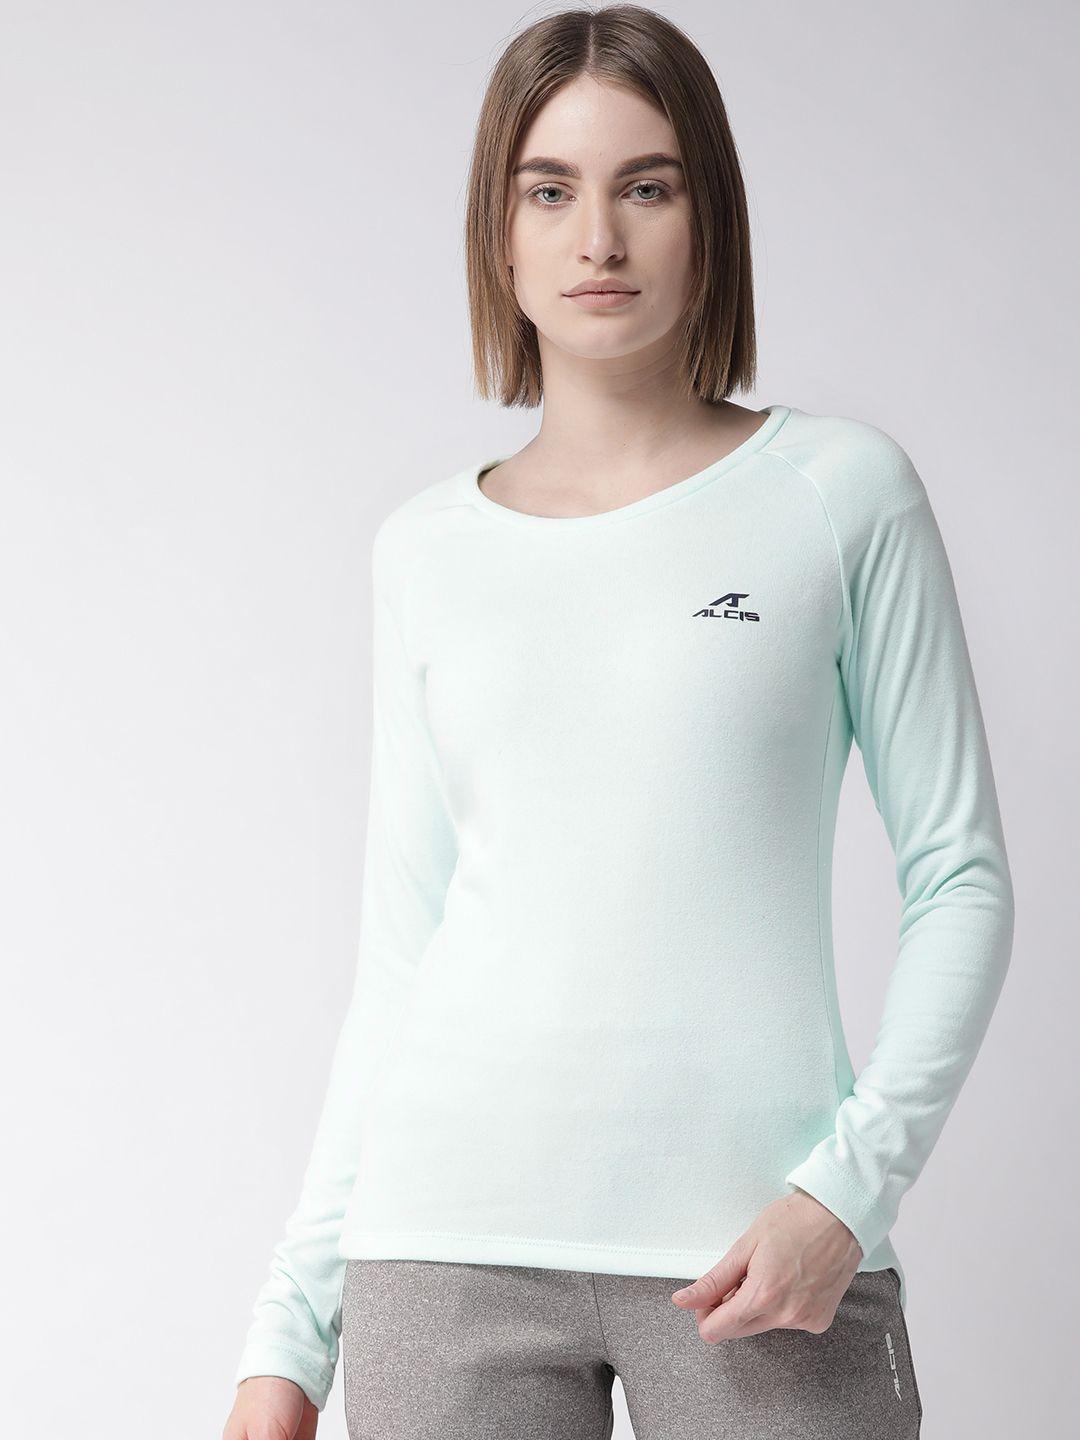 alcis-women-sea-green-solid-round-neck-sporty-t-shirt